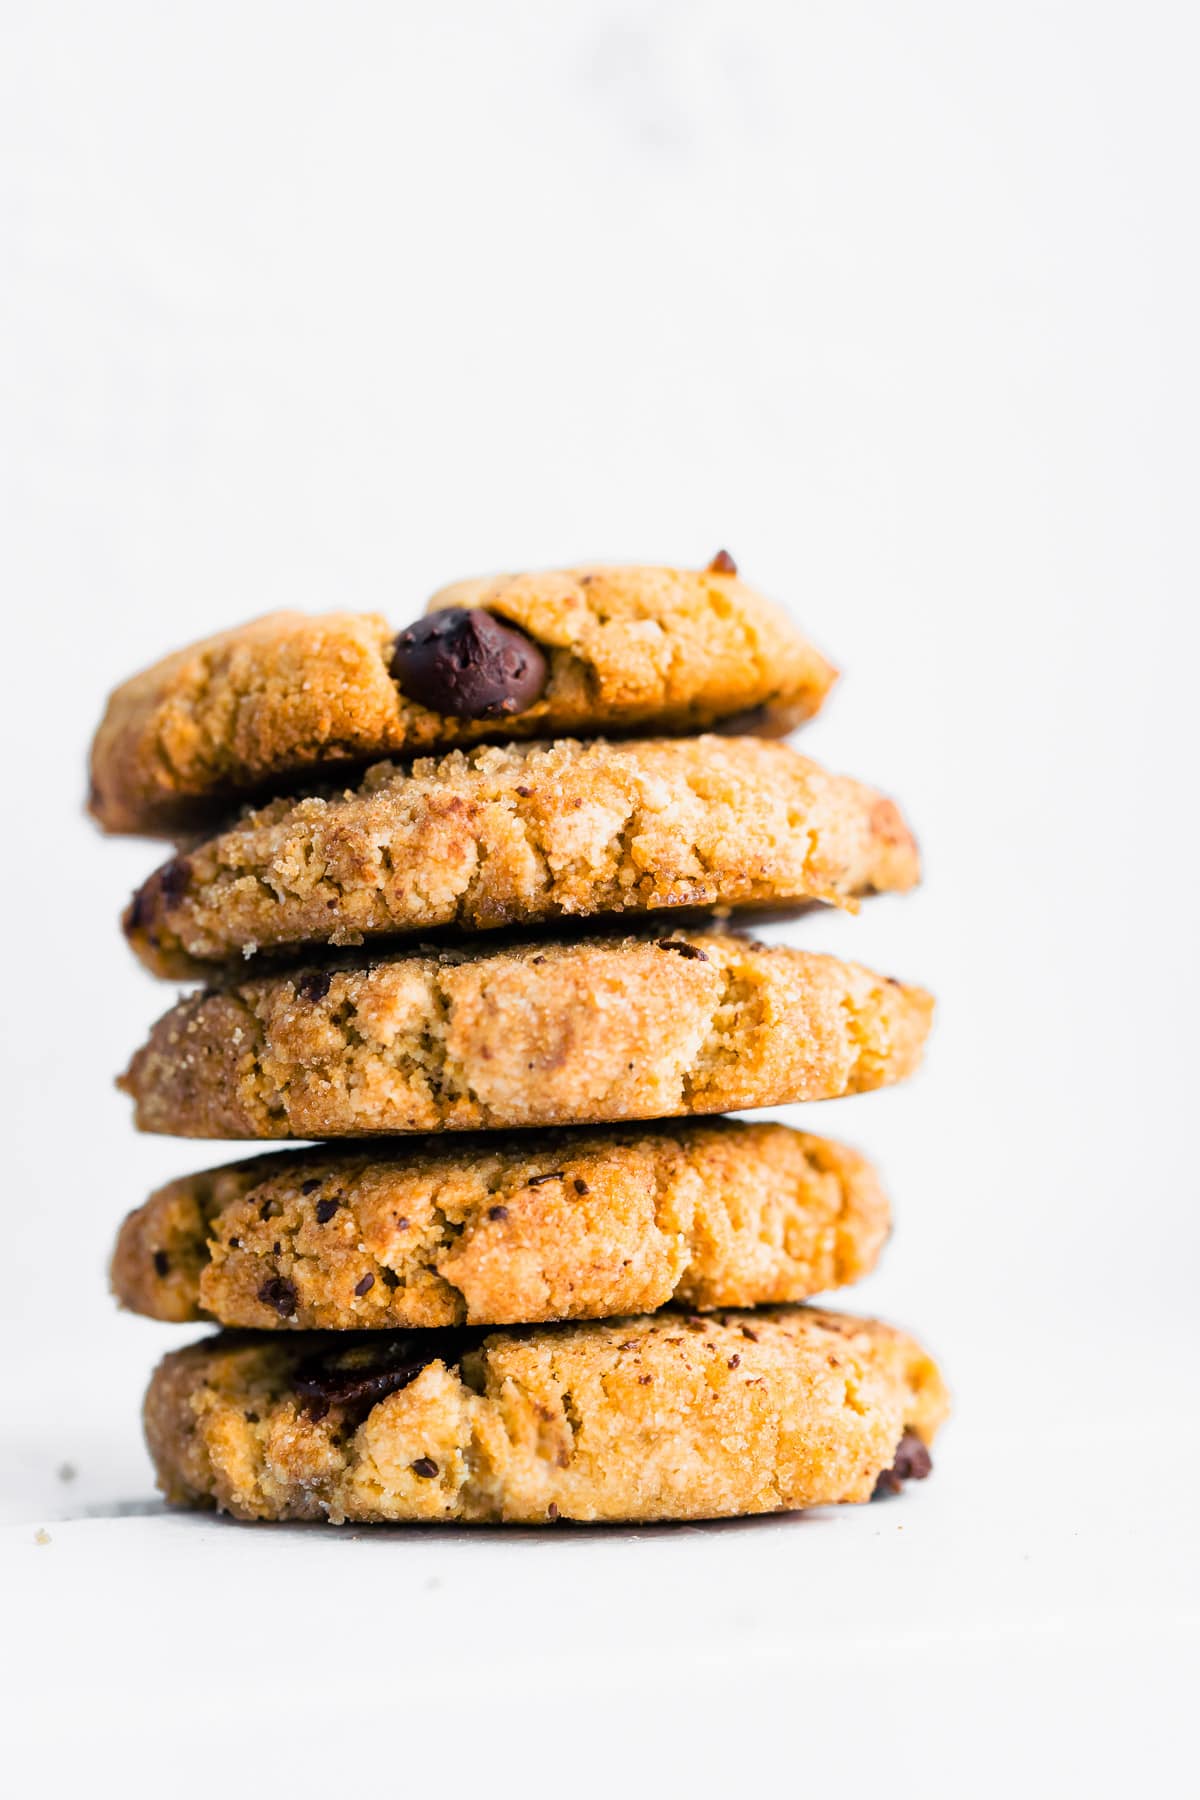 tall stack of homemade almond flour cookies with chocolate chips.